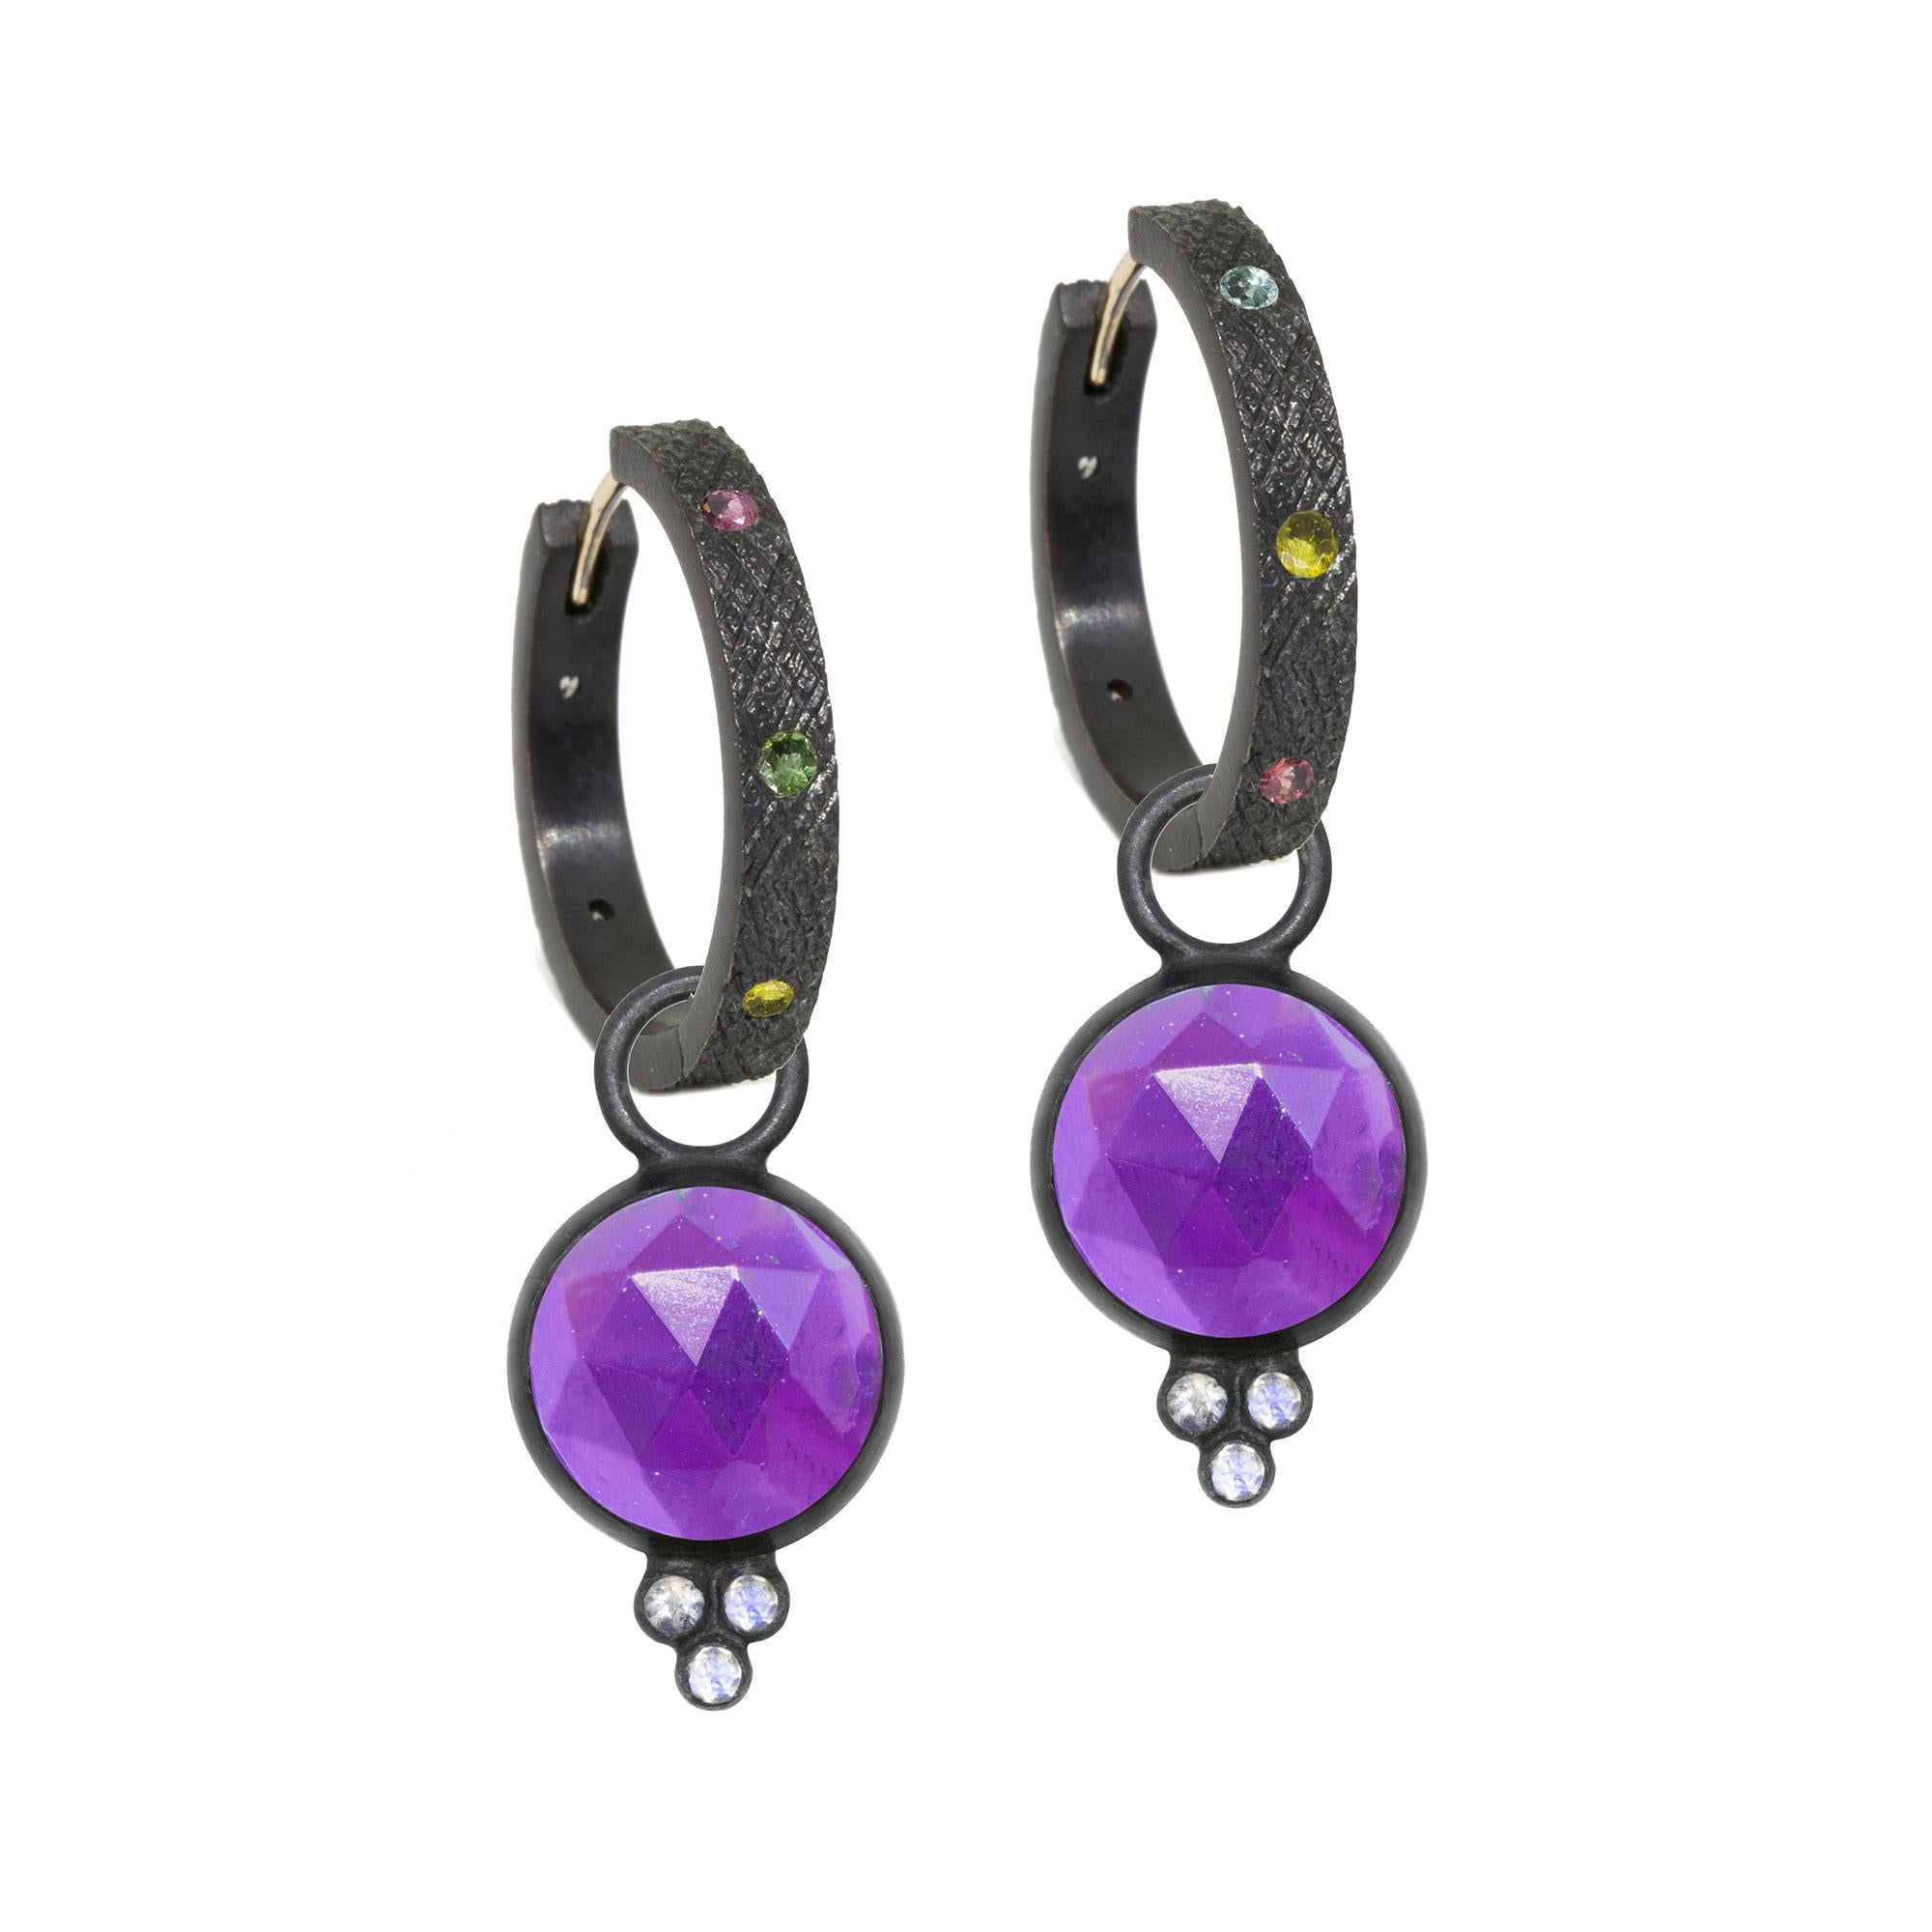 A Nina Nguyen classic to collect and treasure: Our diamond-accented Chloe Oxidized Charms are designed with faceted amethyst rimmed in blackened silver. They pair with any of our hoops and mix well with other styles.

Nina Nguyen Design's